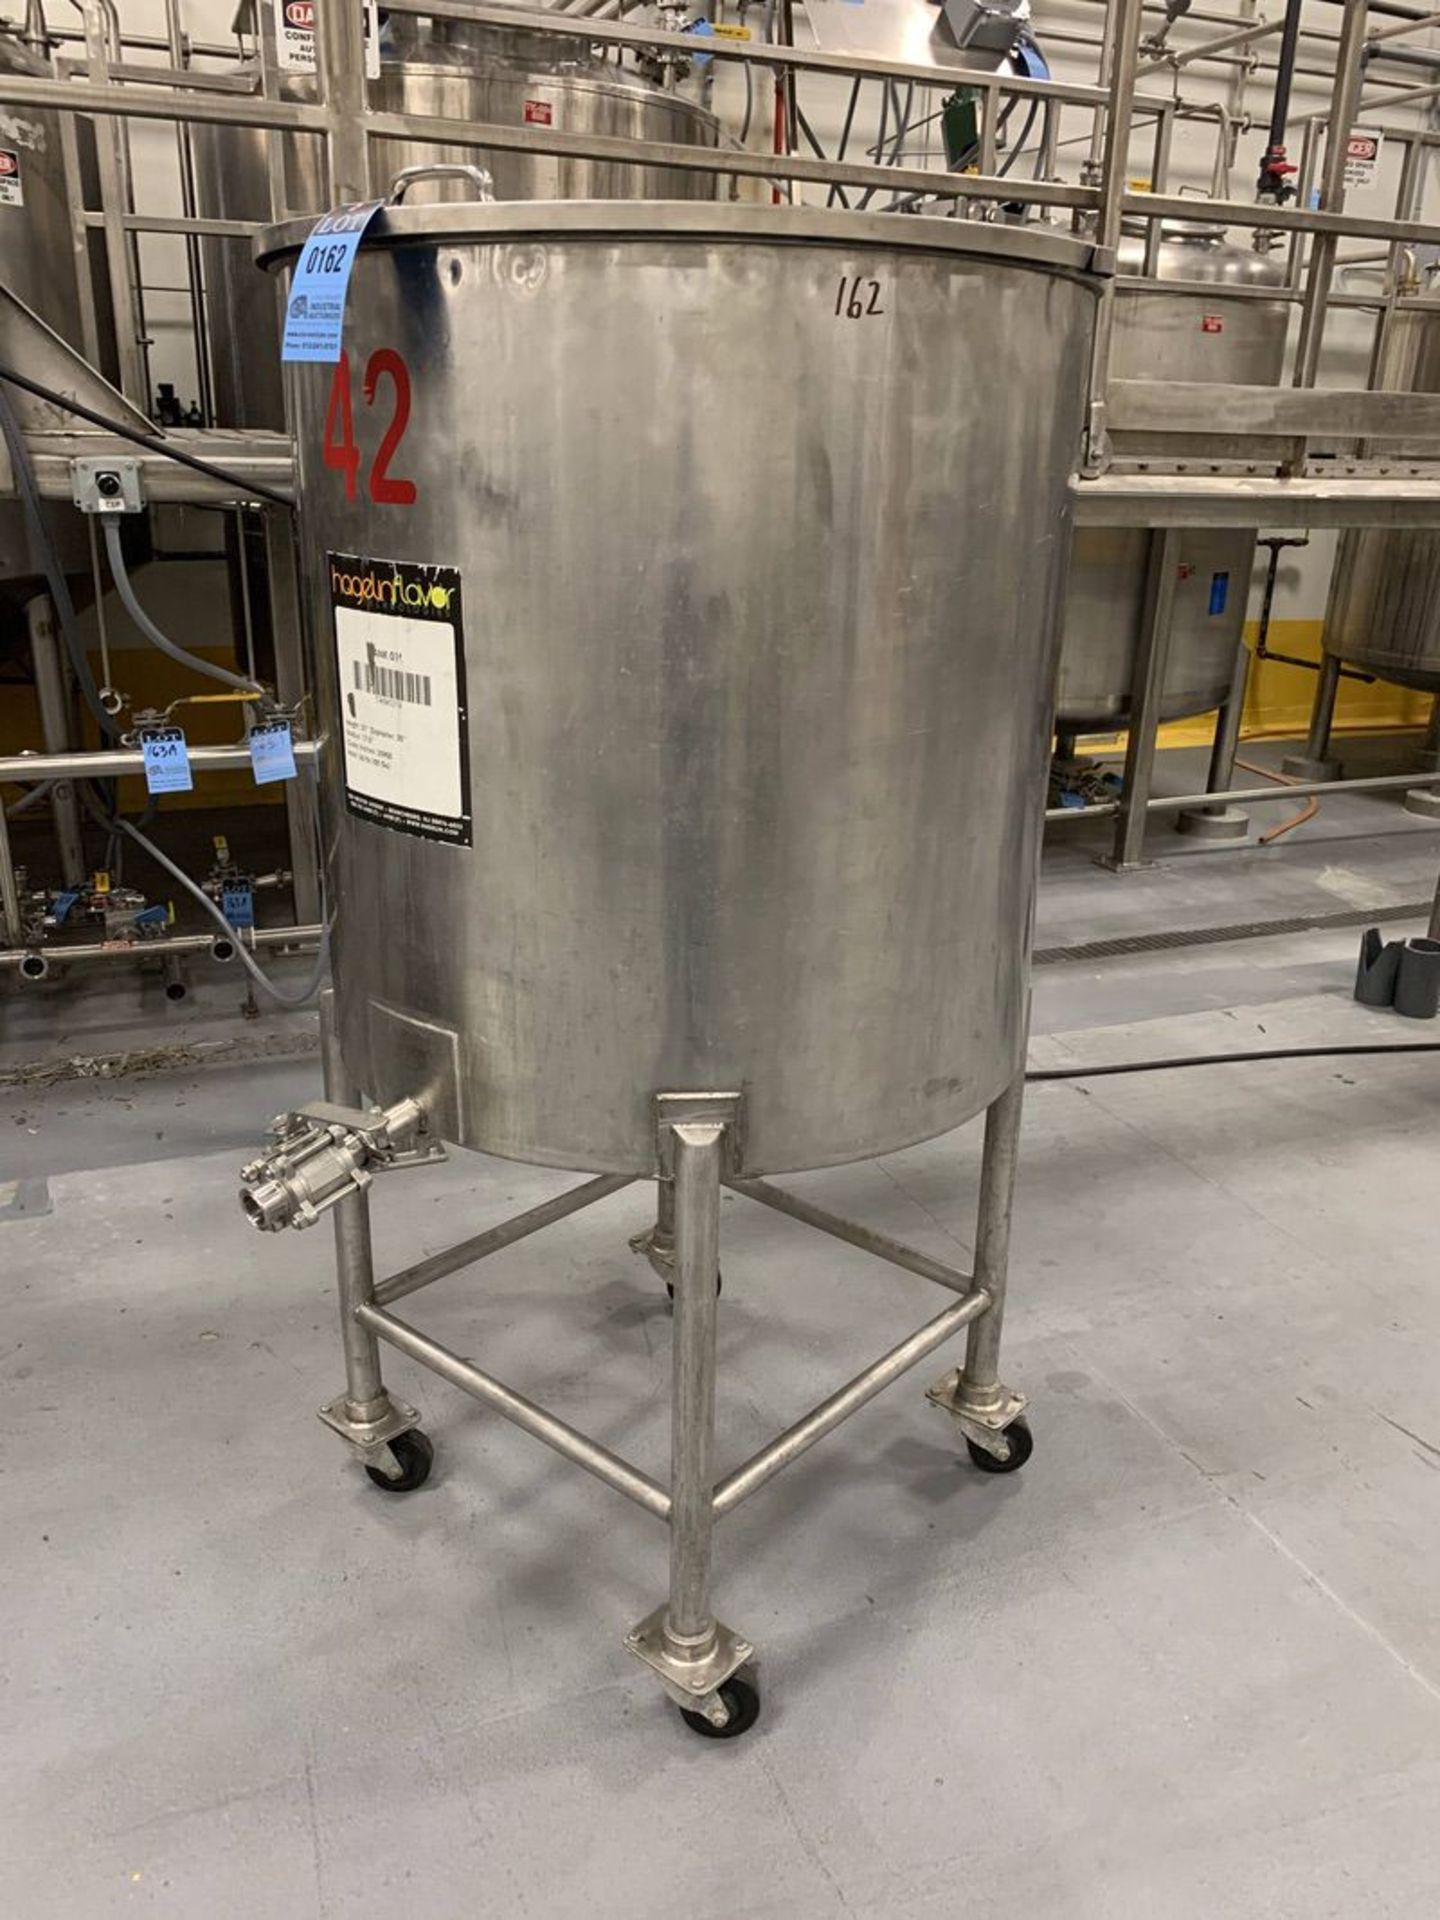 155 GALLON PORTABLE STAINLESS STEEL MIX TANK, 35" DIAMETER X 37" HIGH | Rig Fee: $150